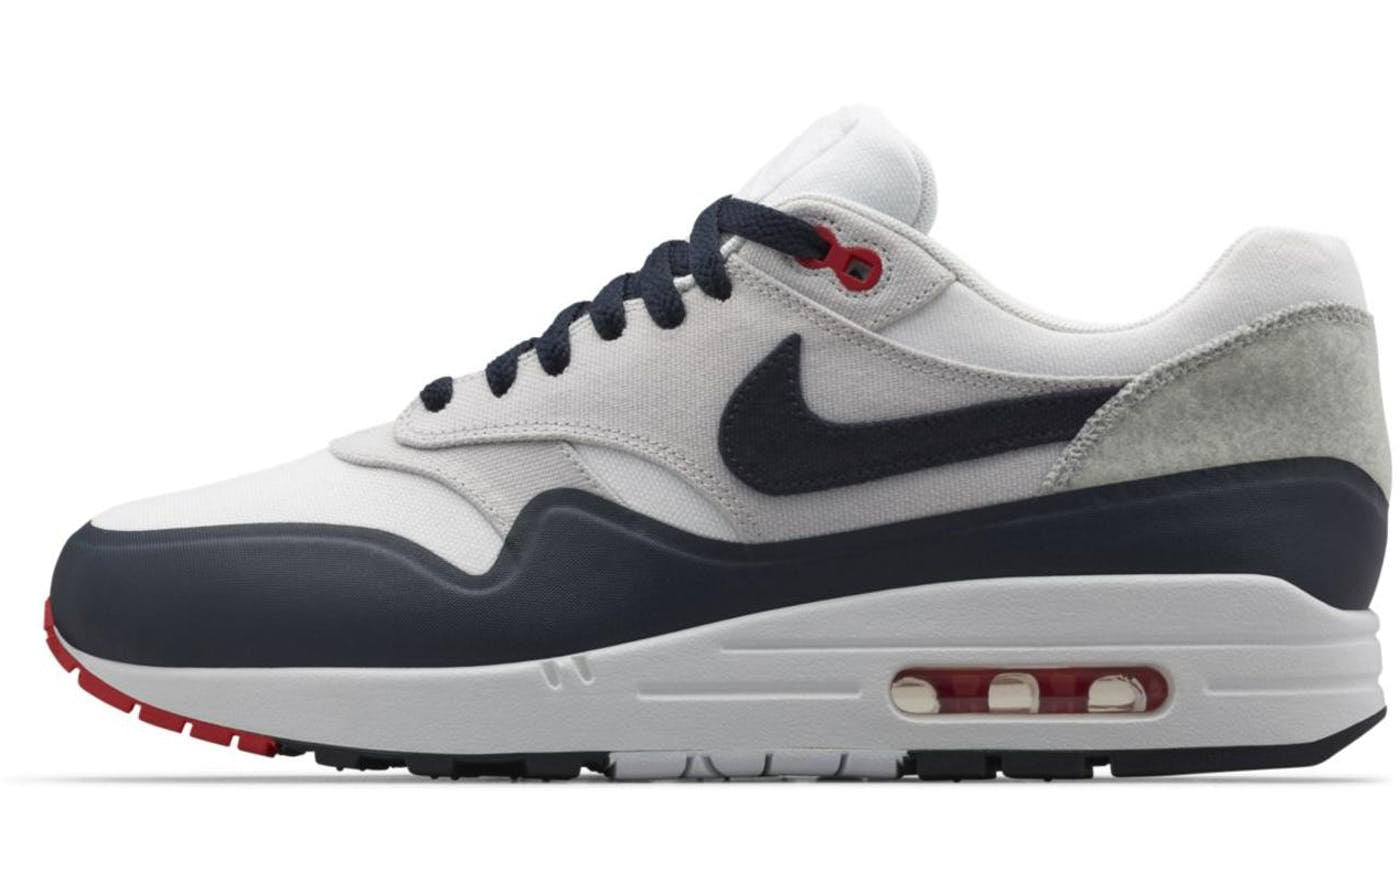 Nike Air Max 1 V SP Patch Pack - Obsidian 704901-146 KICKSOVER